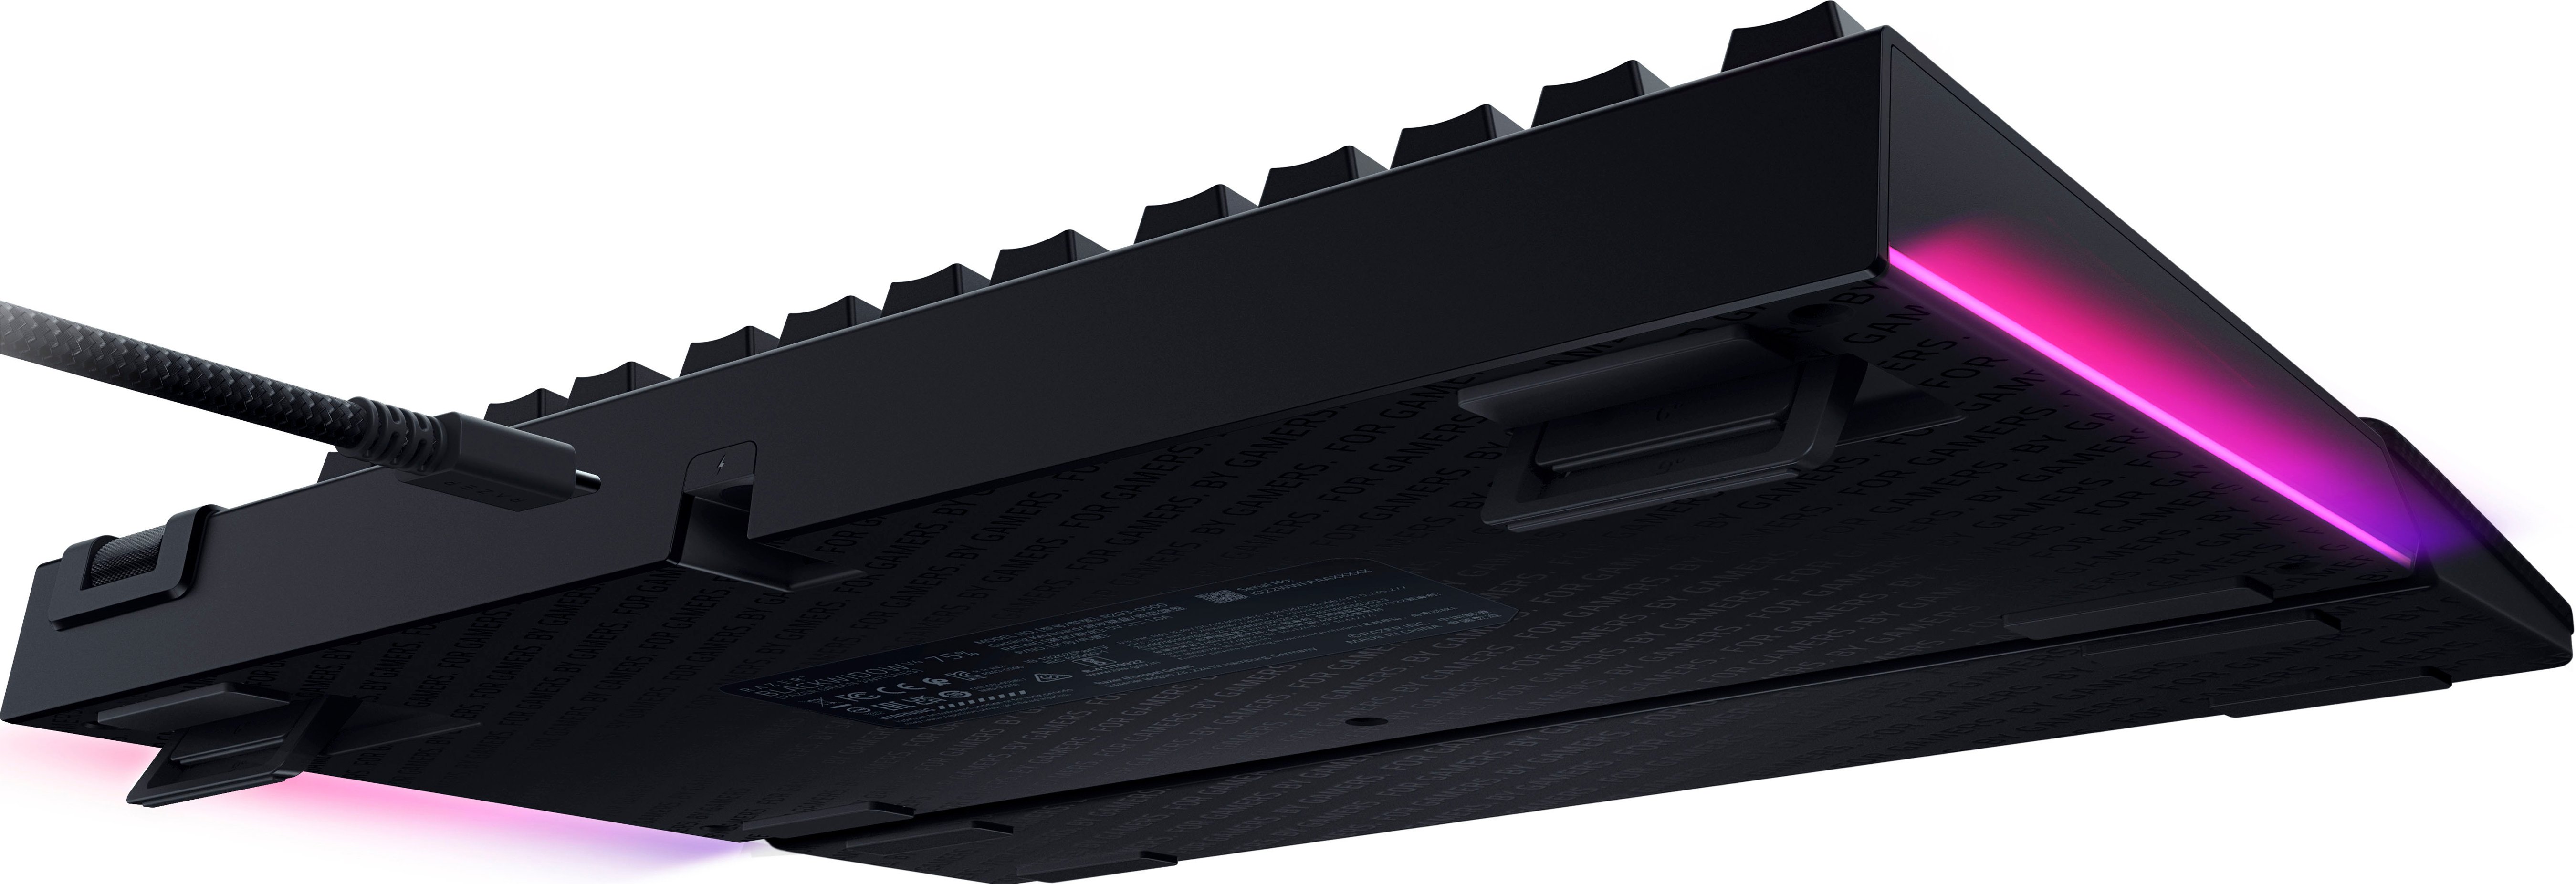 The new Razer BlackWidow V4 75% keyboard includes hot-swappable switches  for its keys - Neowin